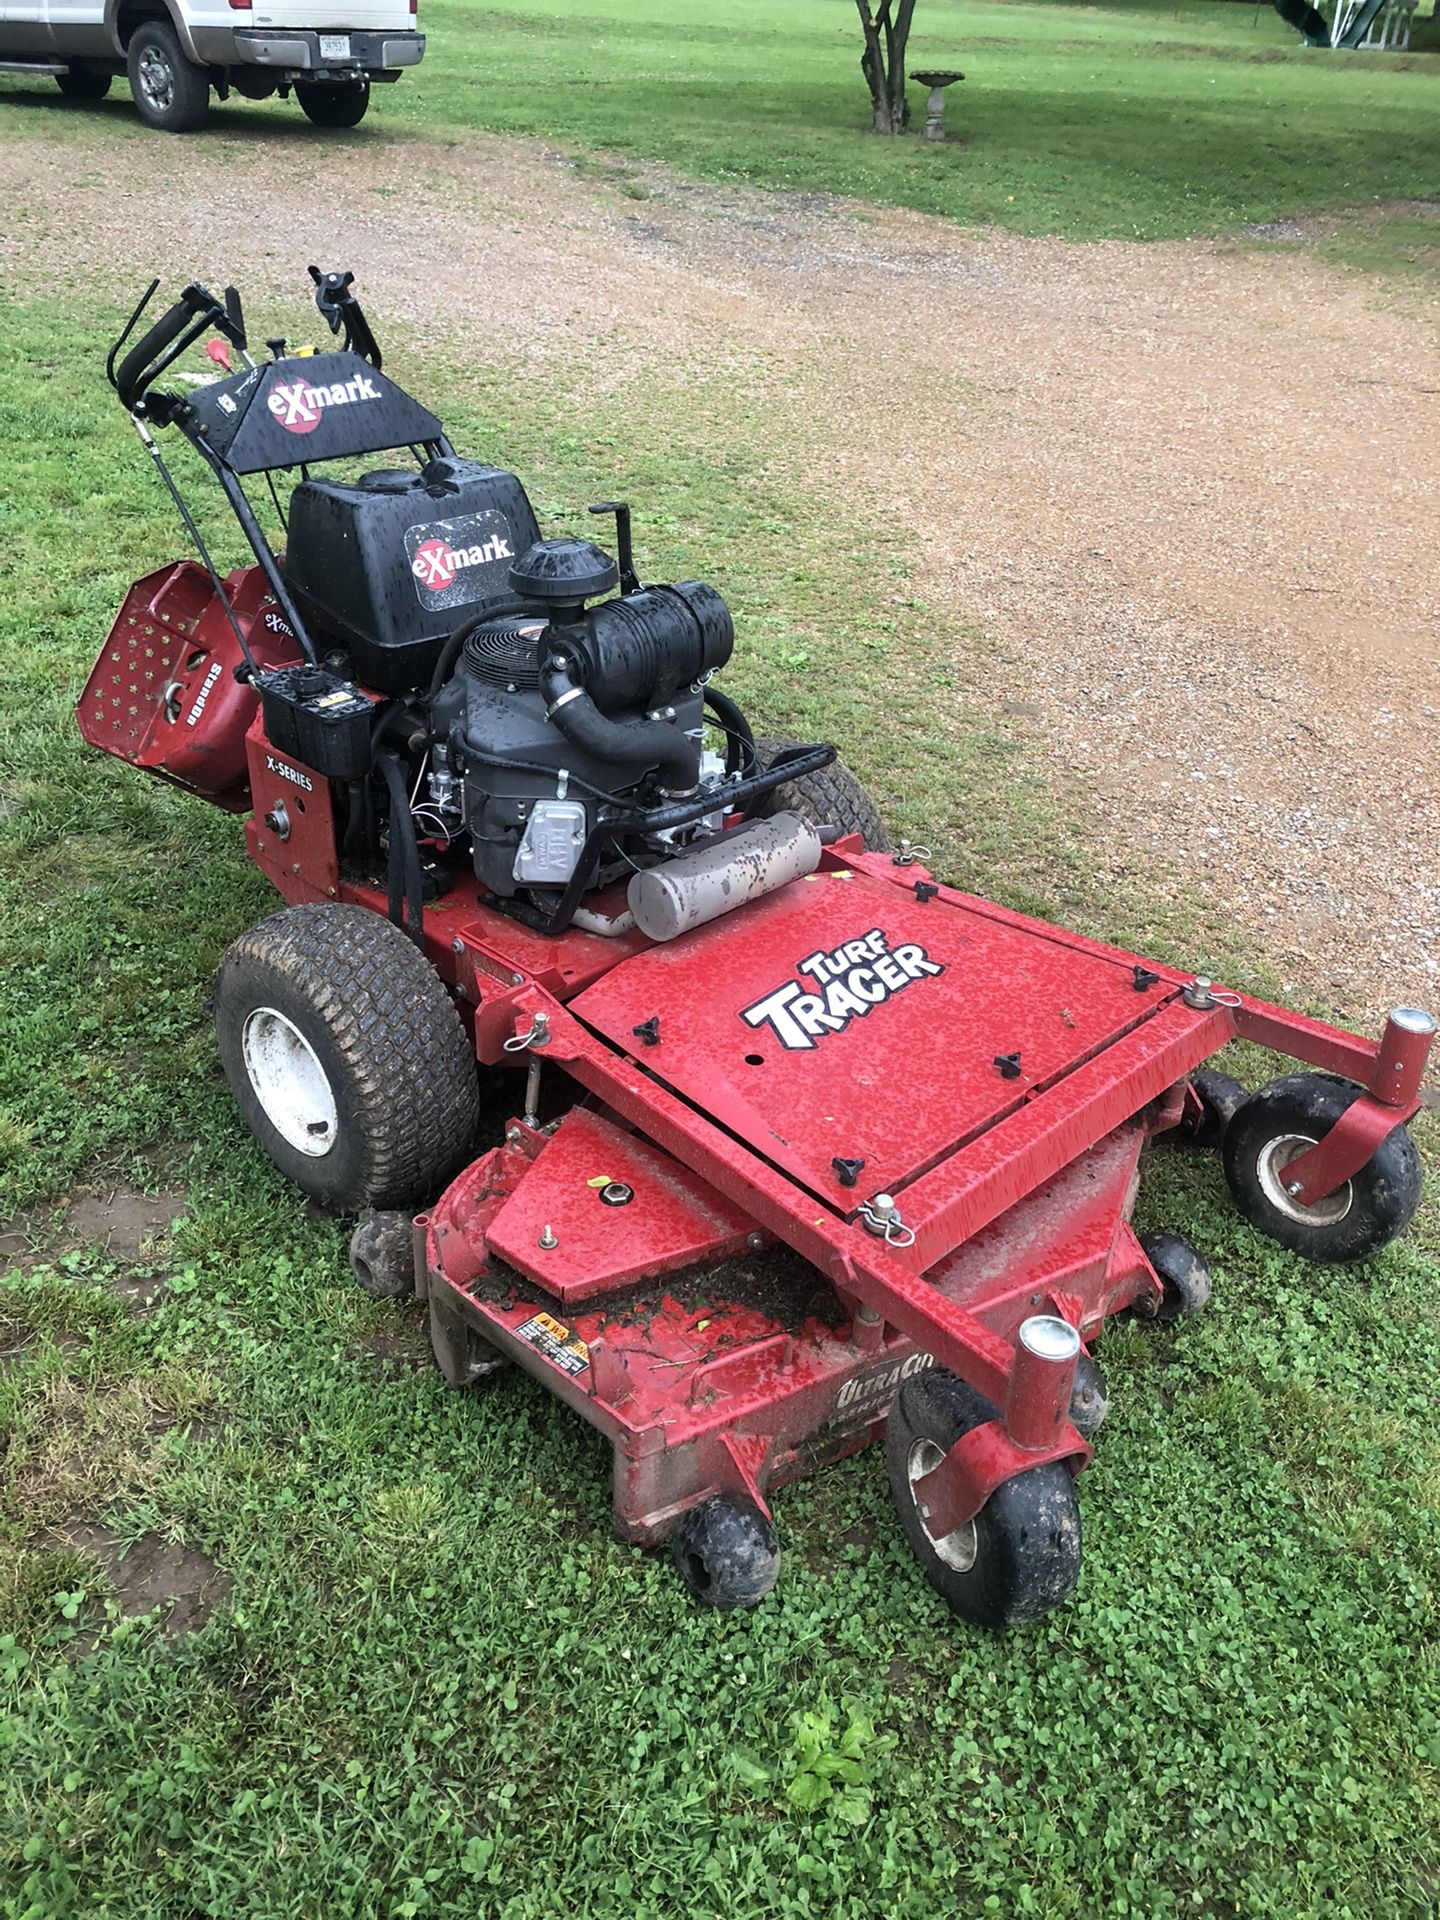 Exmark commercial mower x-series. 300 hours